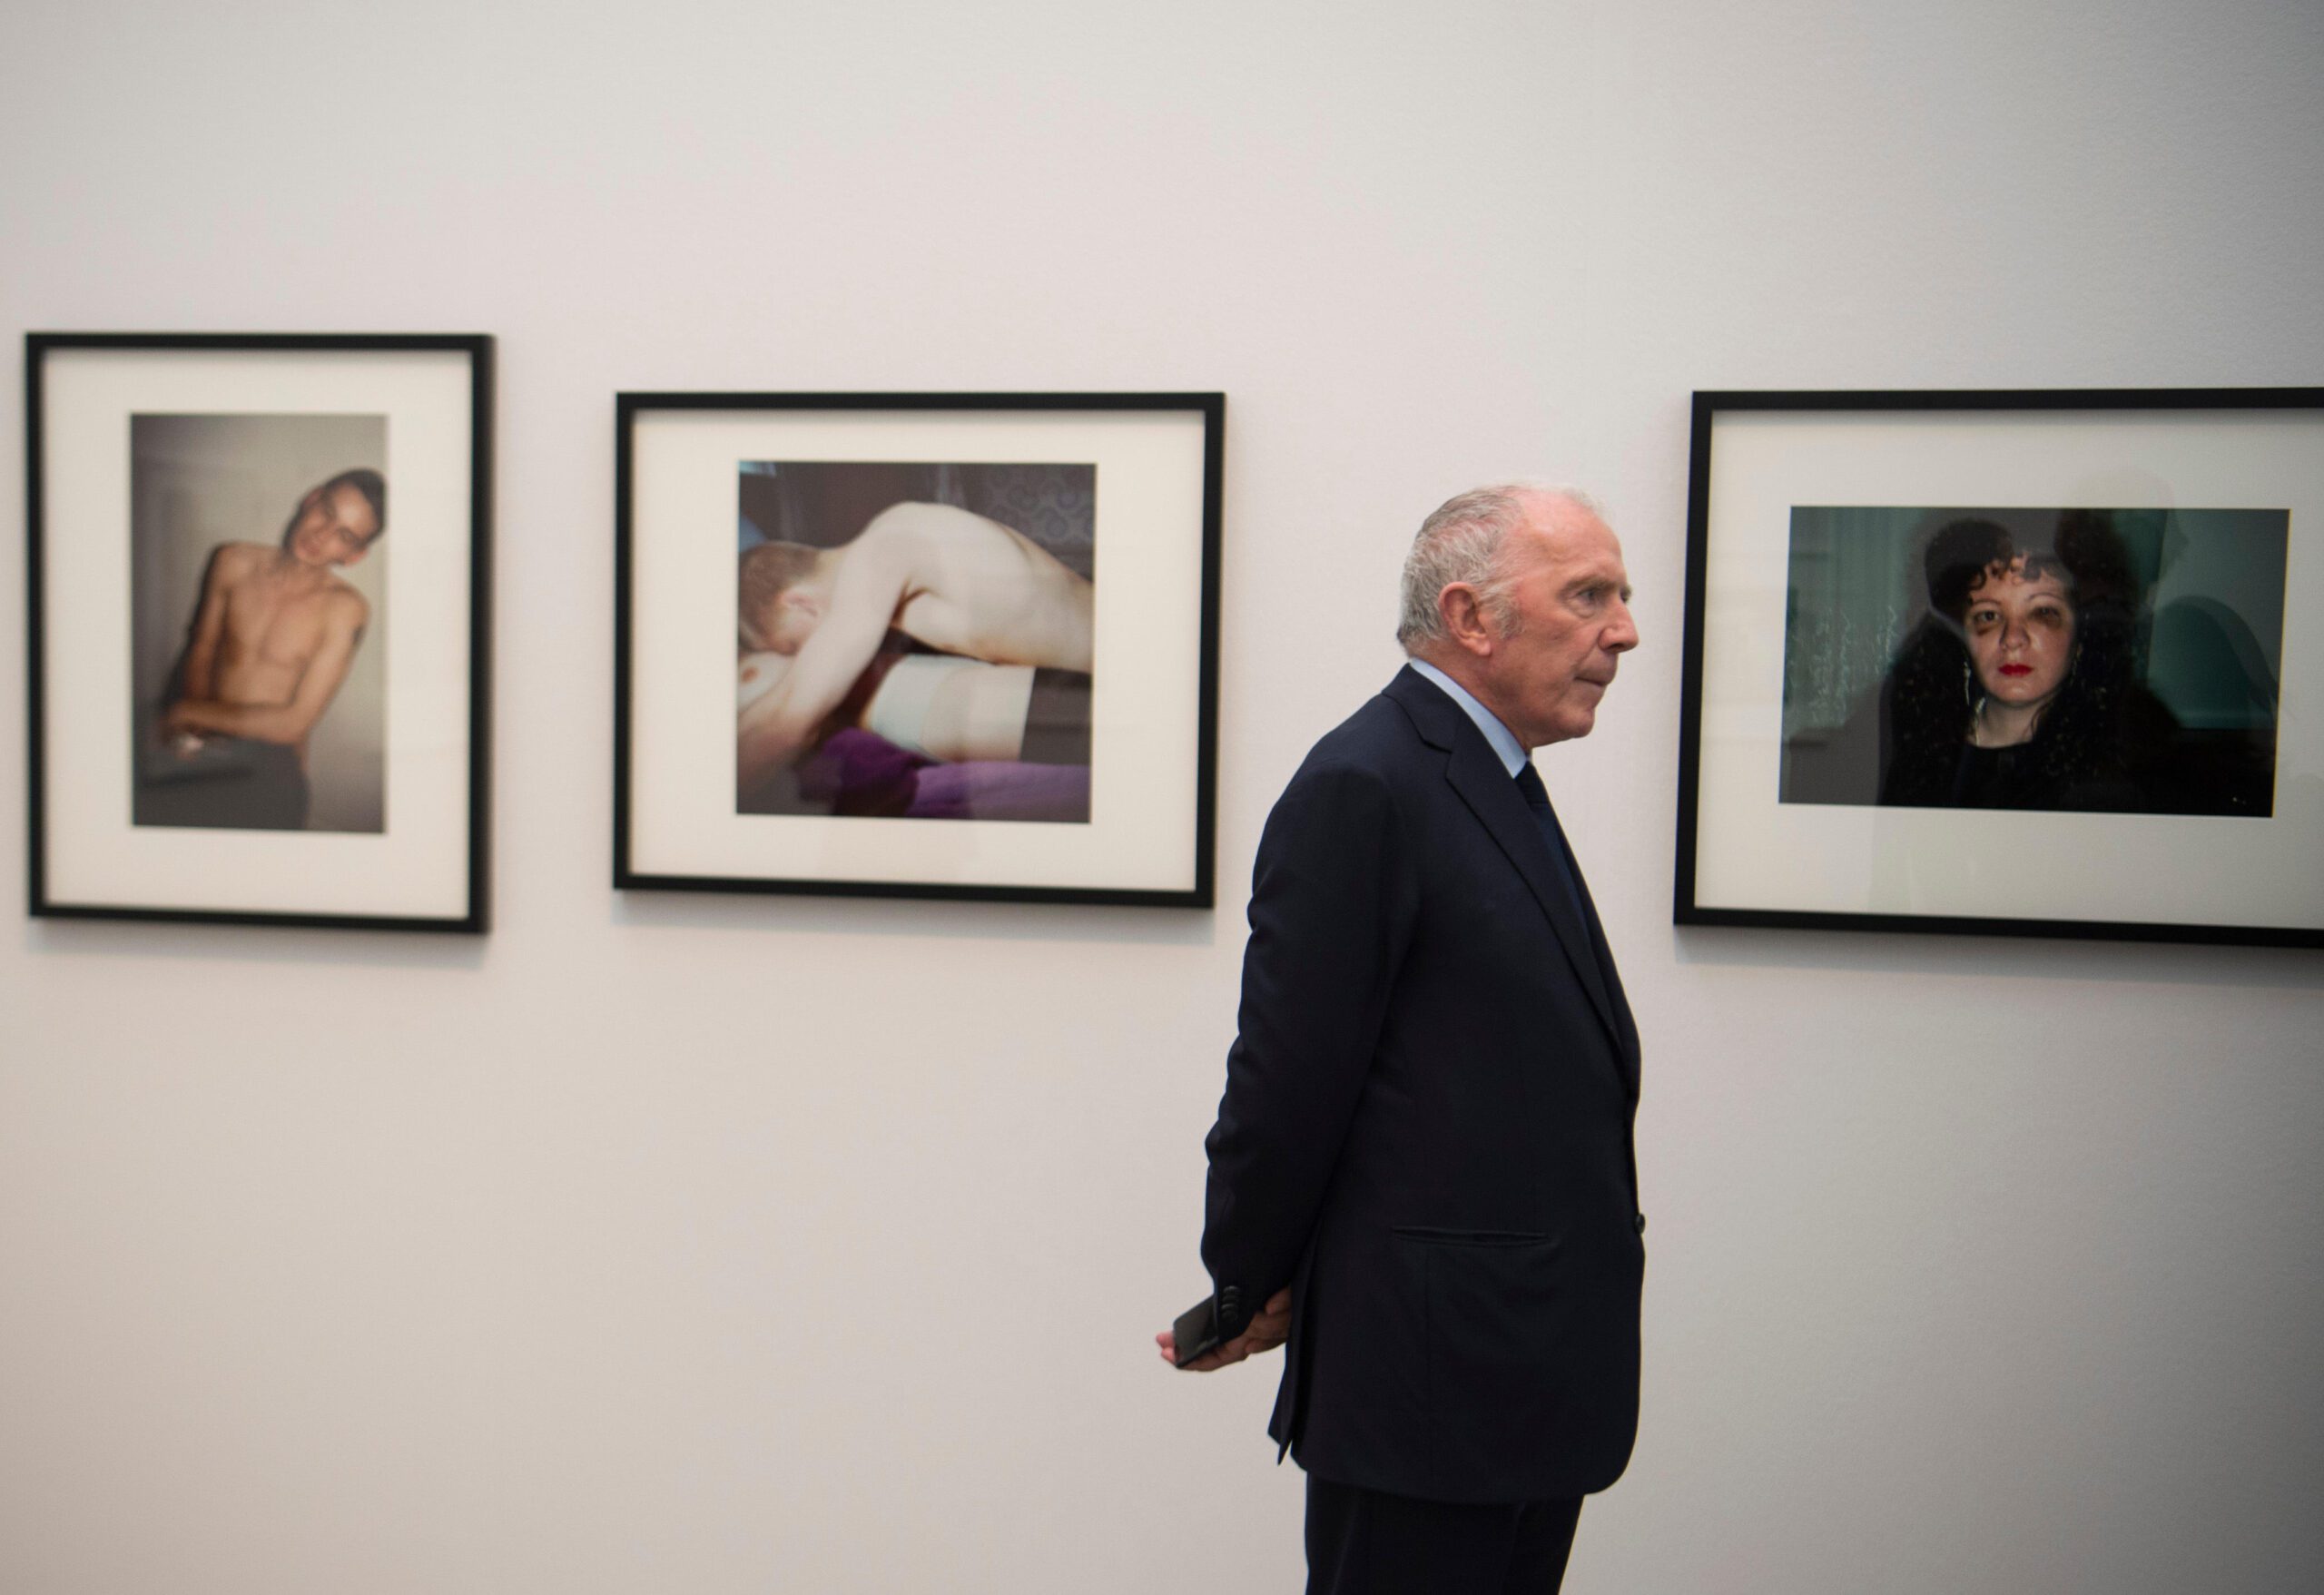 Pinault Collection owner Francois Pinault seen in front of works by US photographer Nan Goldin. dpa picture alliance / Alamy Stock Photo